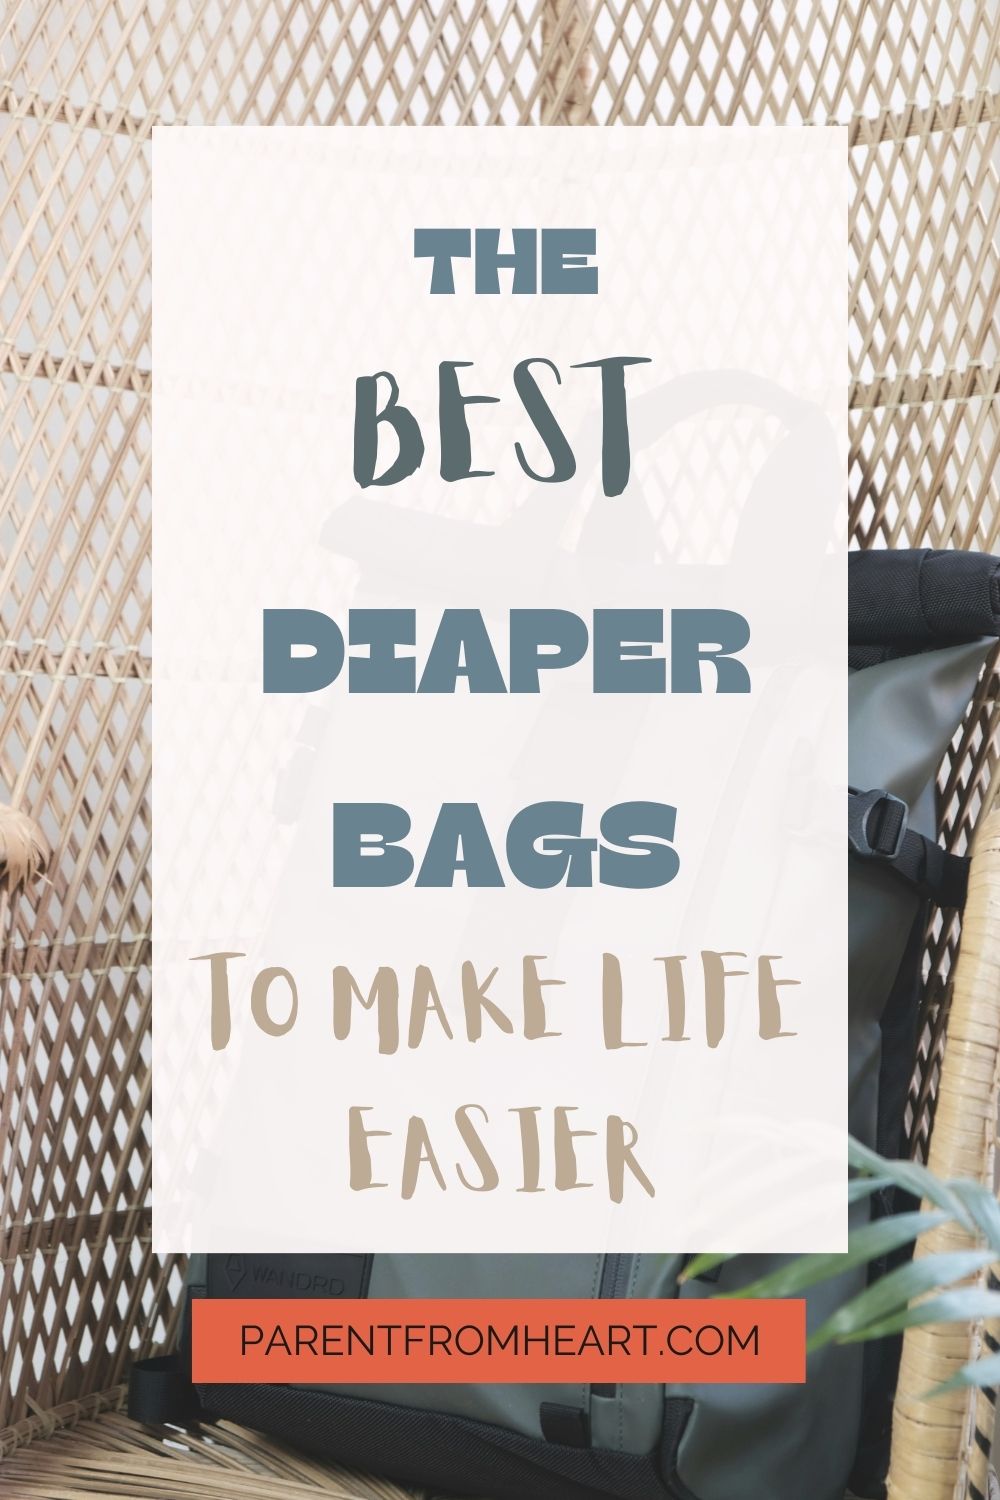 The best diaper bags to make life easier!